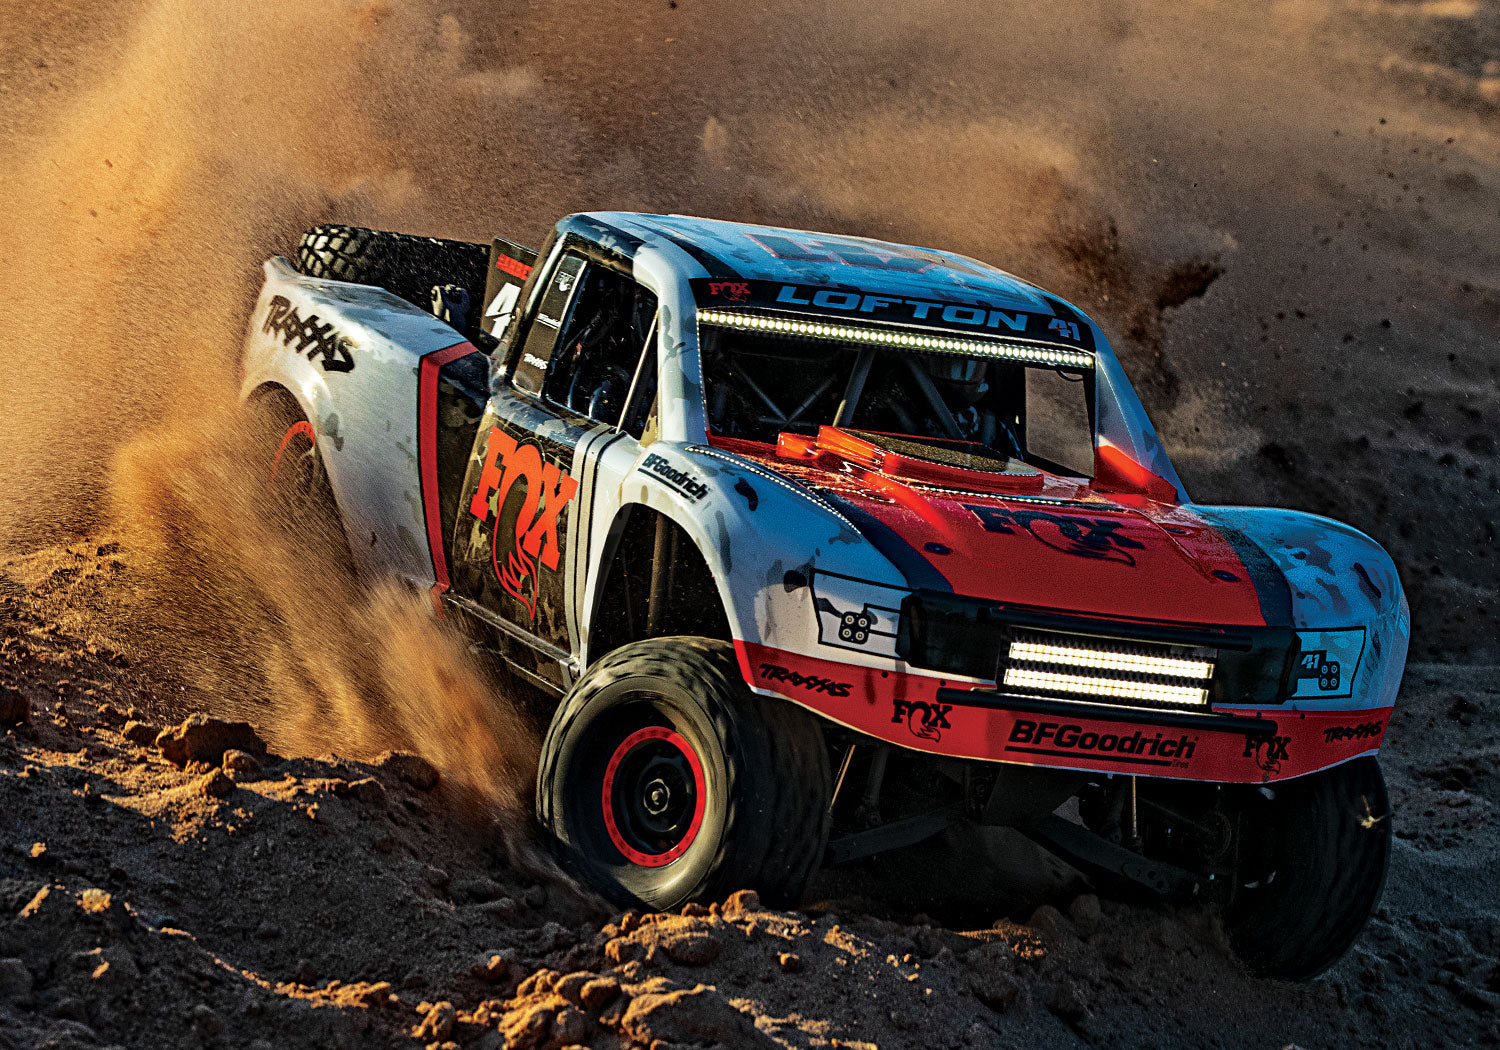 Fox Unlimited Desert Racer®: 4WD Electric Race Truck with TQi™ Traxxas Link™ Enabled 2.4GHz Radio System and Traxxas Stability Management (TSM)®